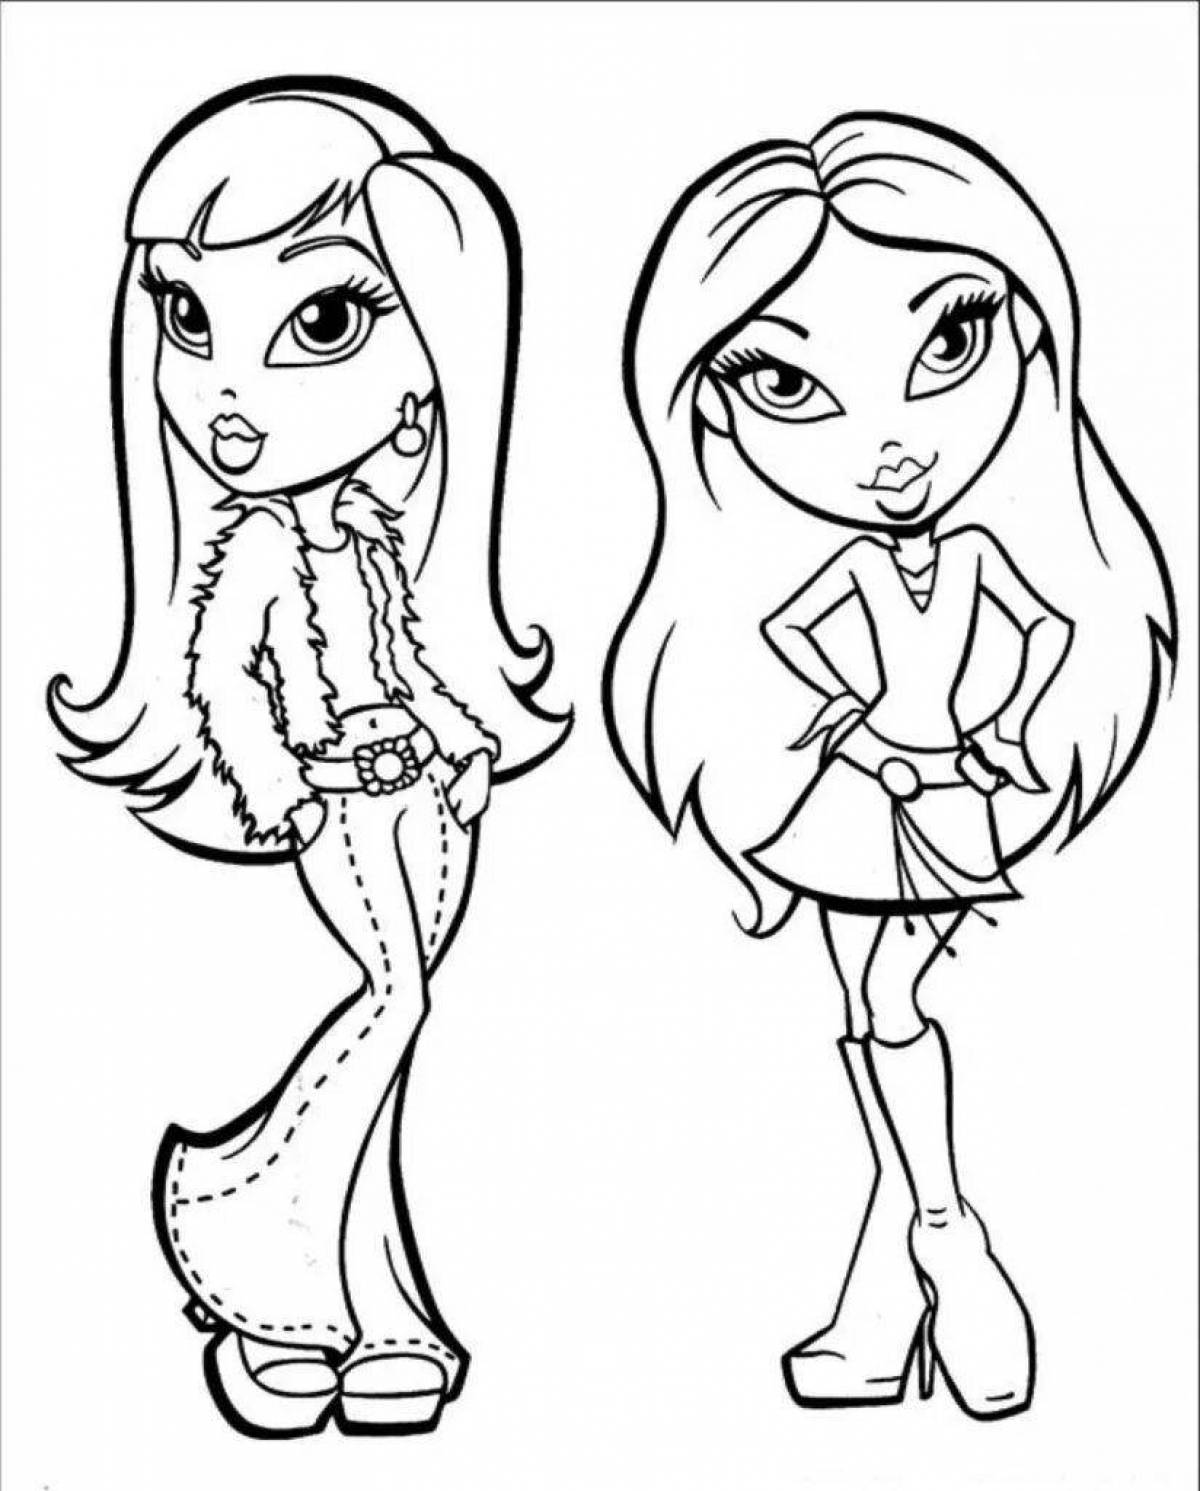 Incredible easy coloring pages for girls 8 years old